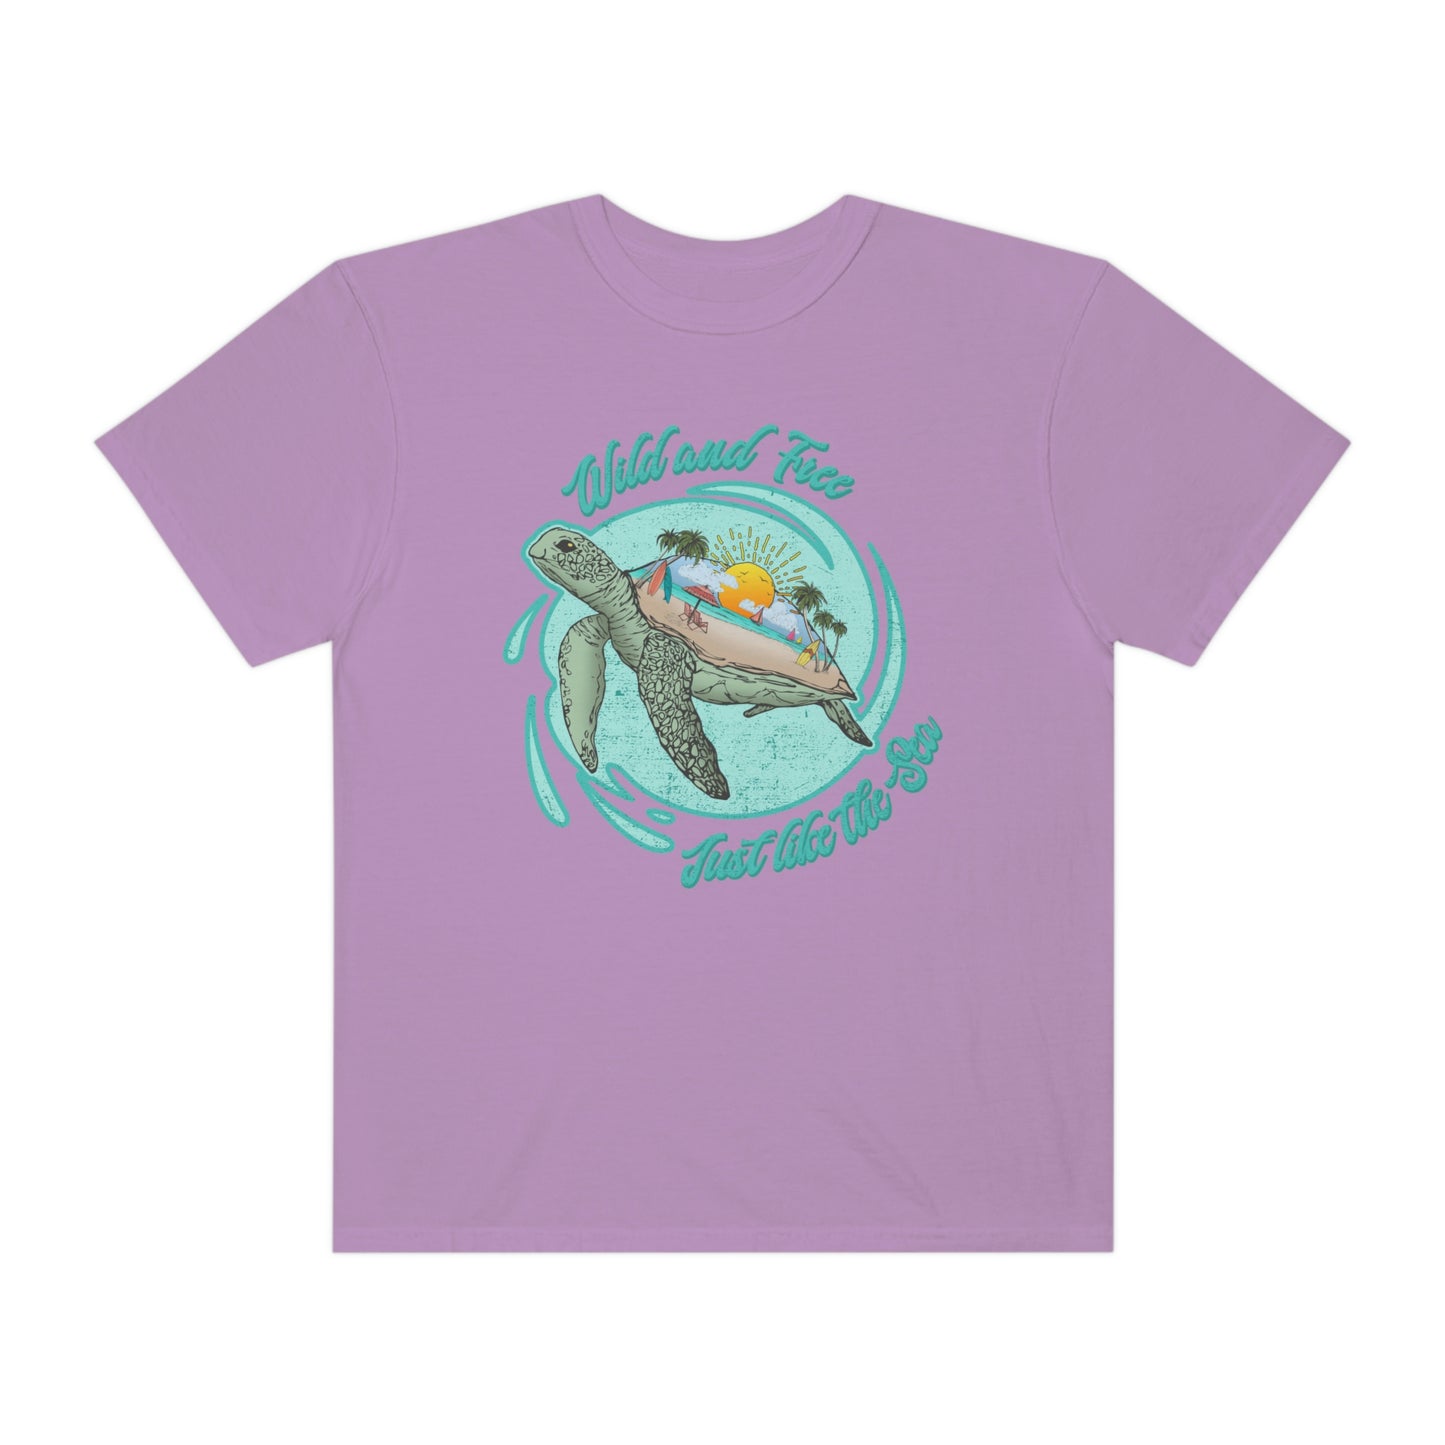 Wild And Free Just Like The Sea Turtle Shirt